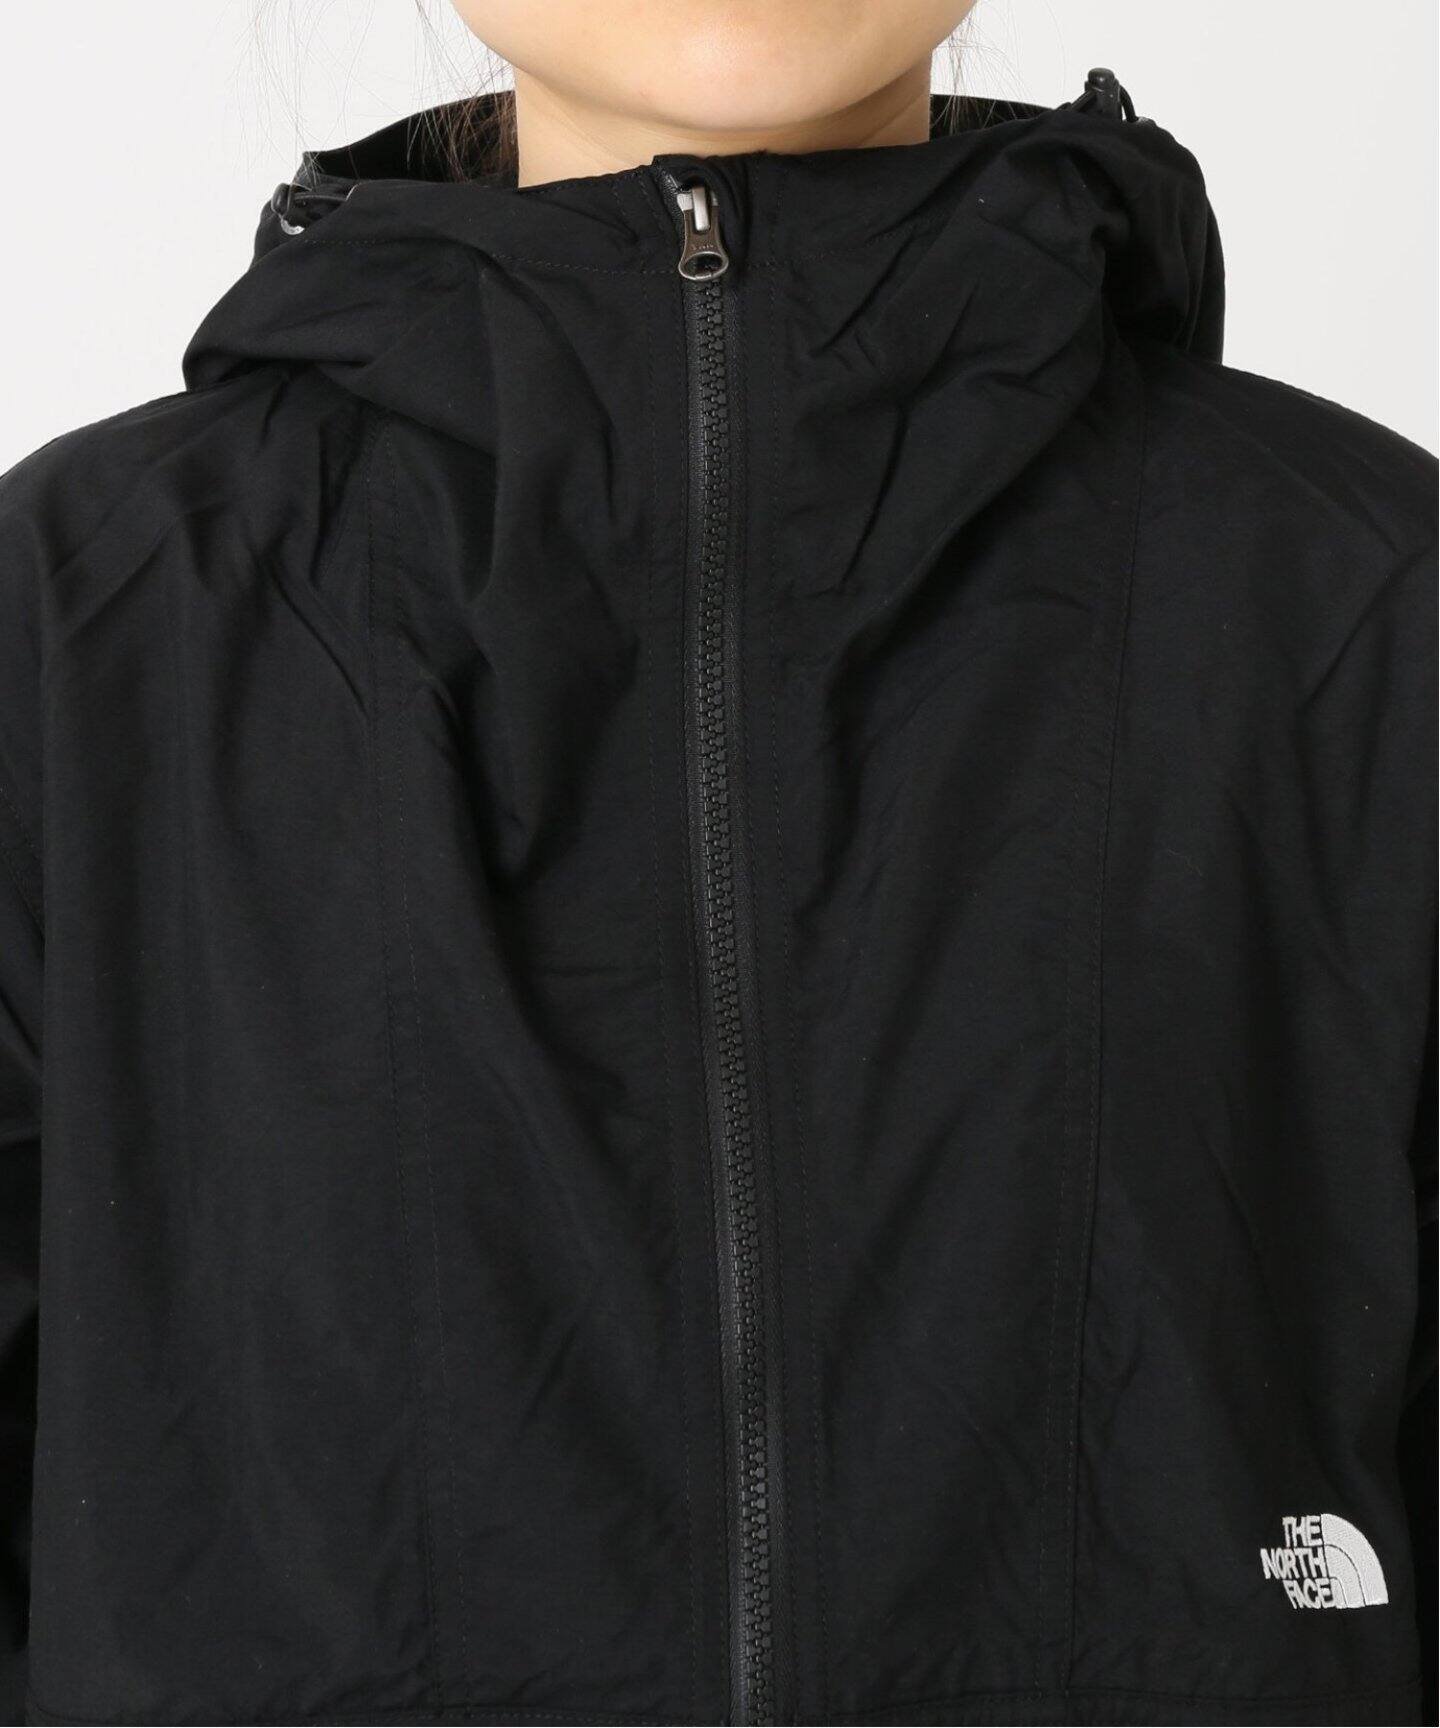 JOURNAL STANDARD relume｜《追加》【THE NORTH FACE】 COMPACTJACKET 